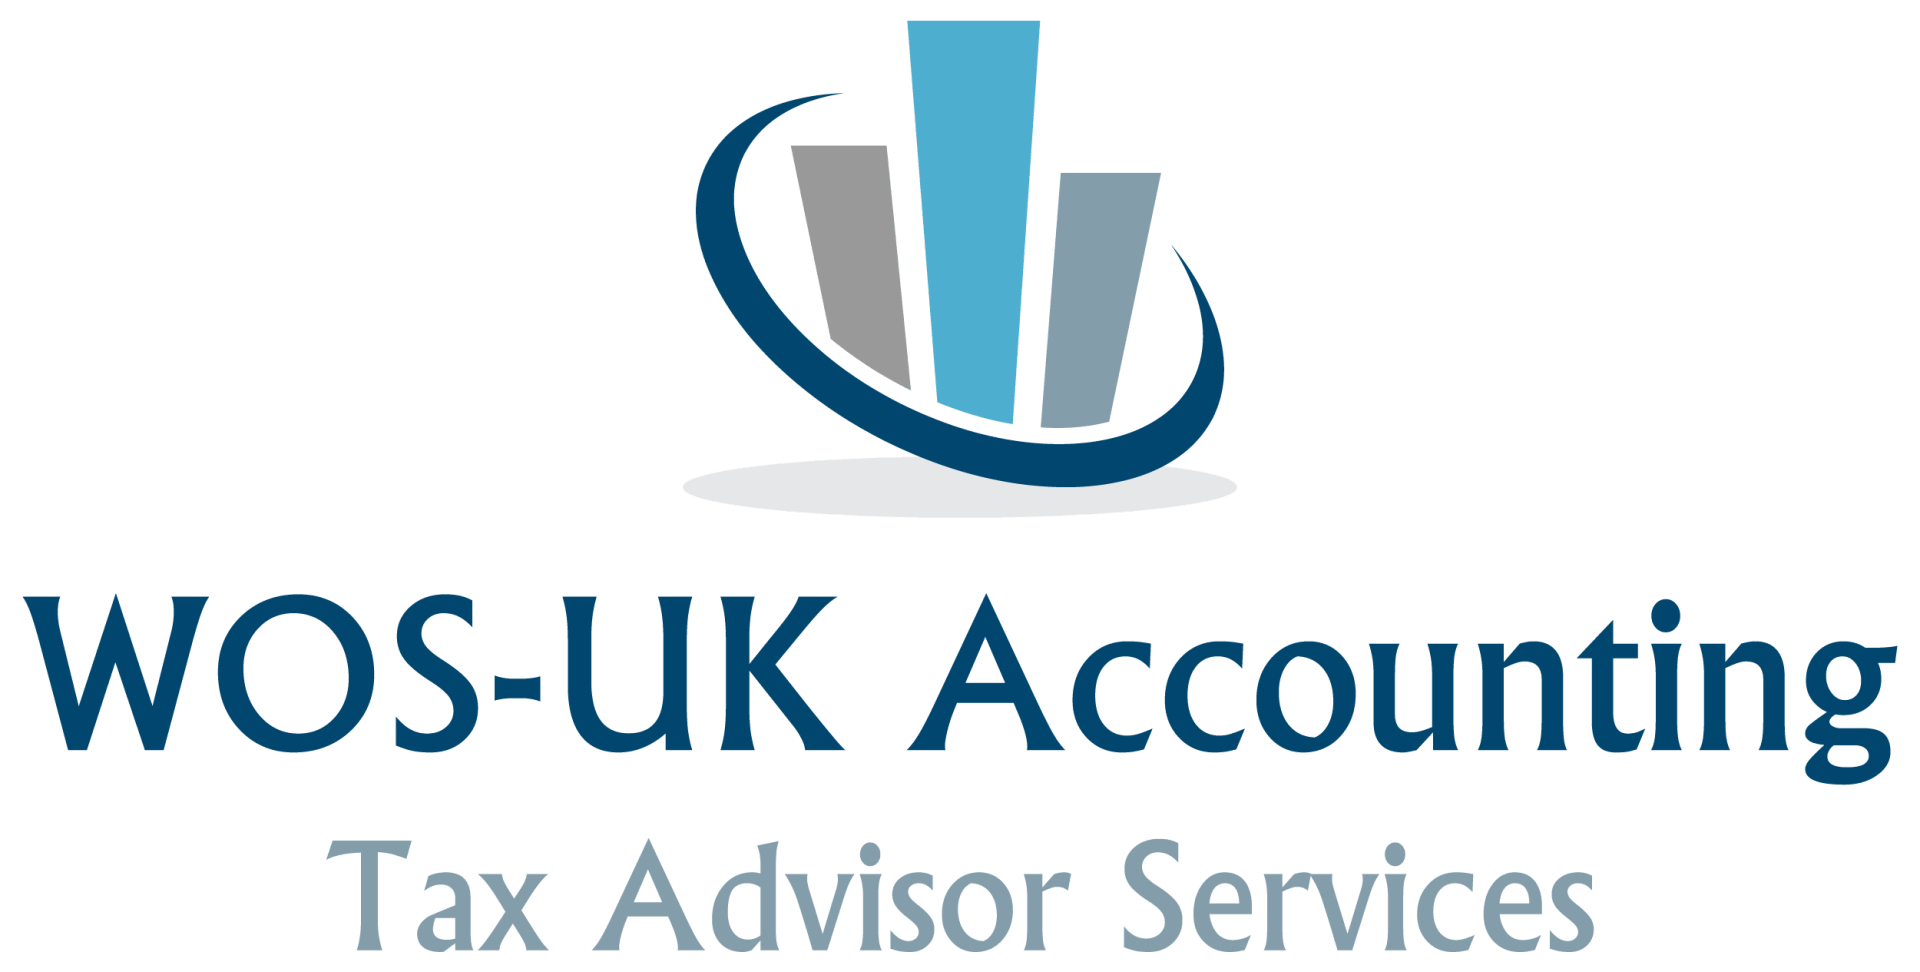 WOS-UK Accounting and Tax Advisor Services